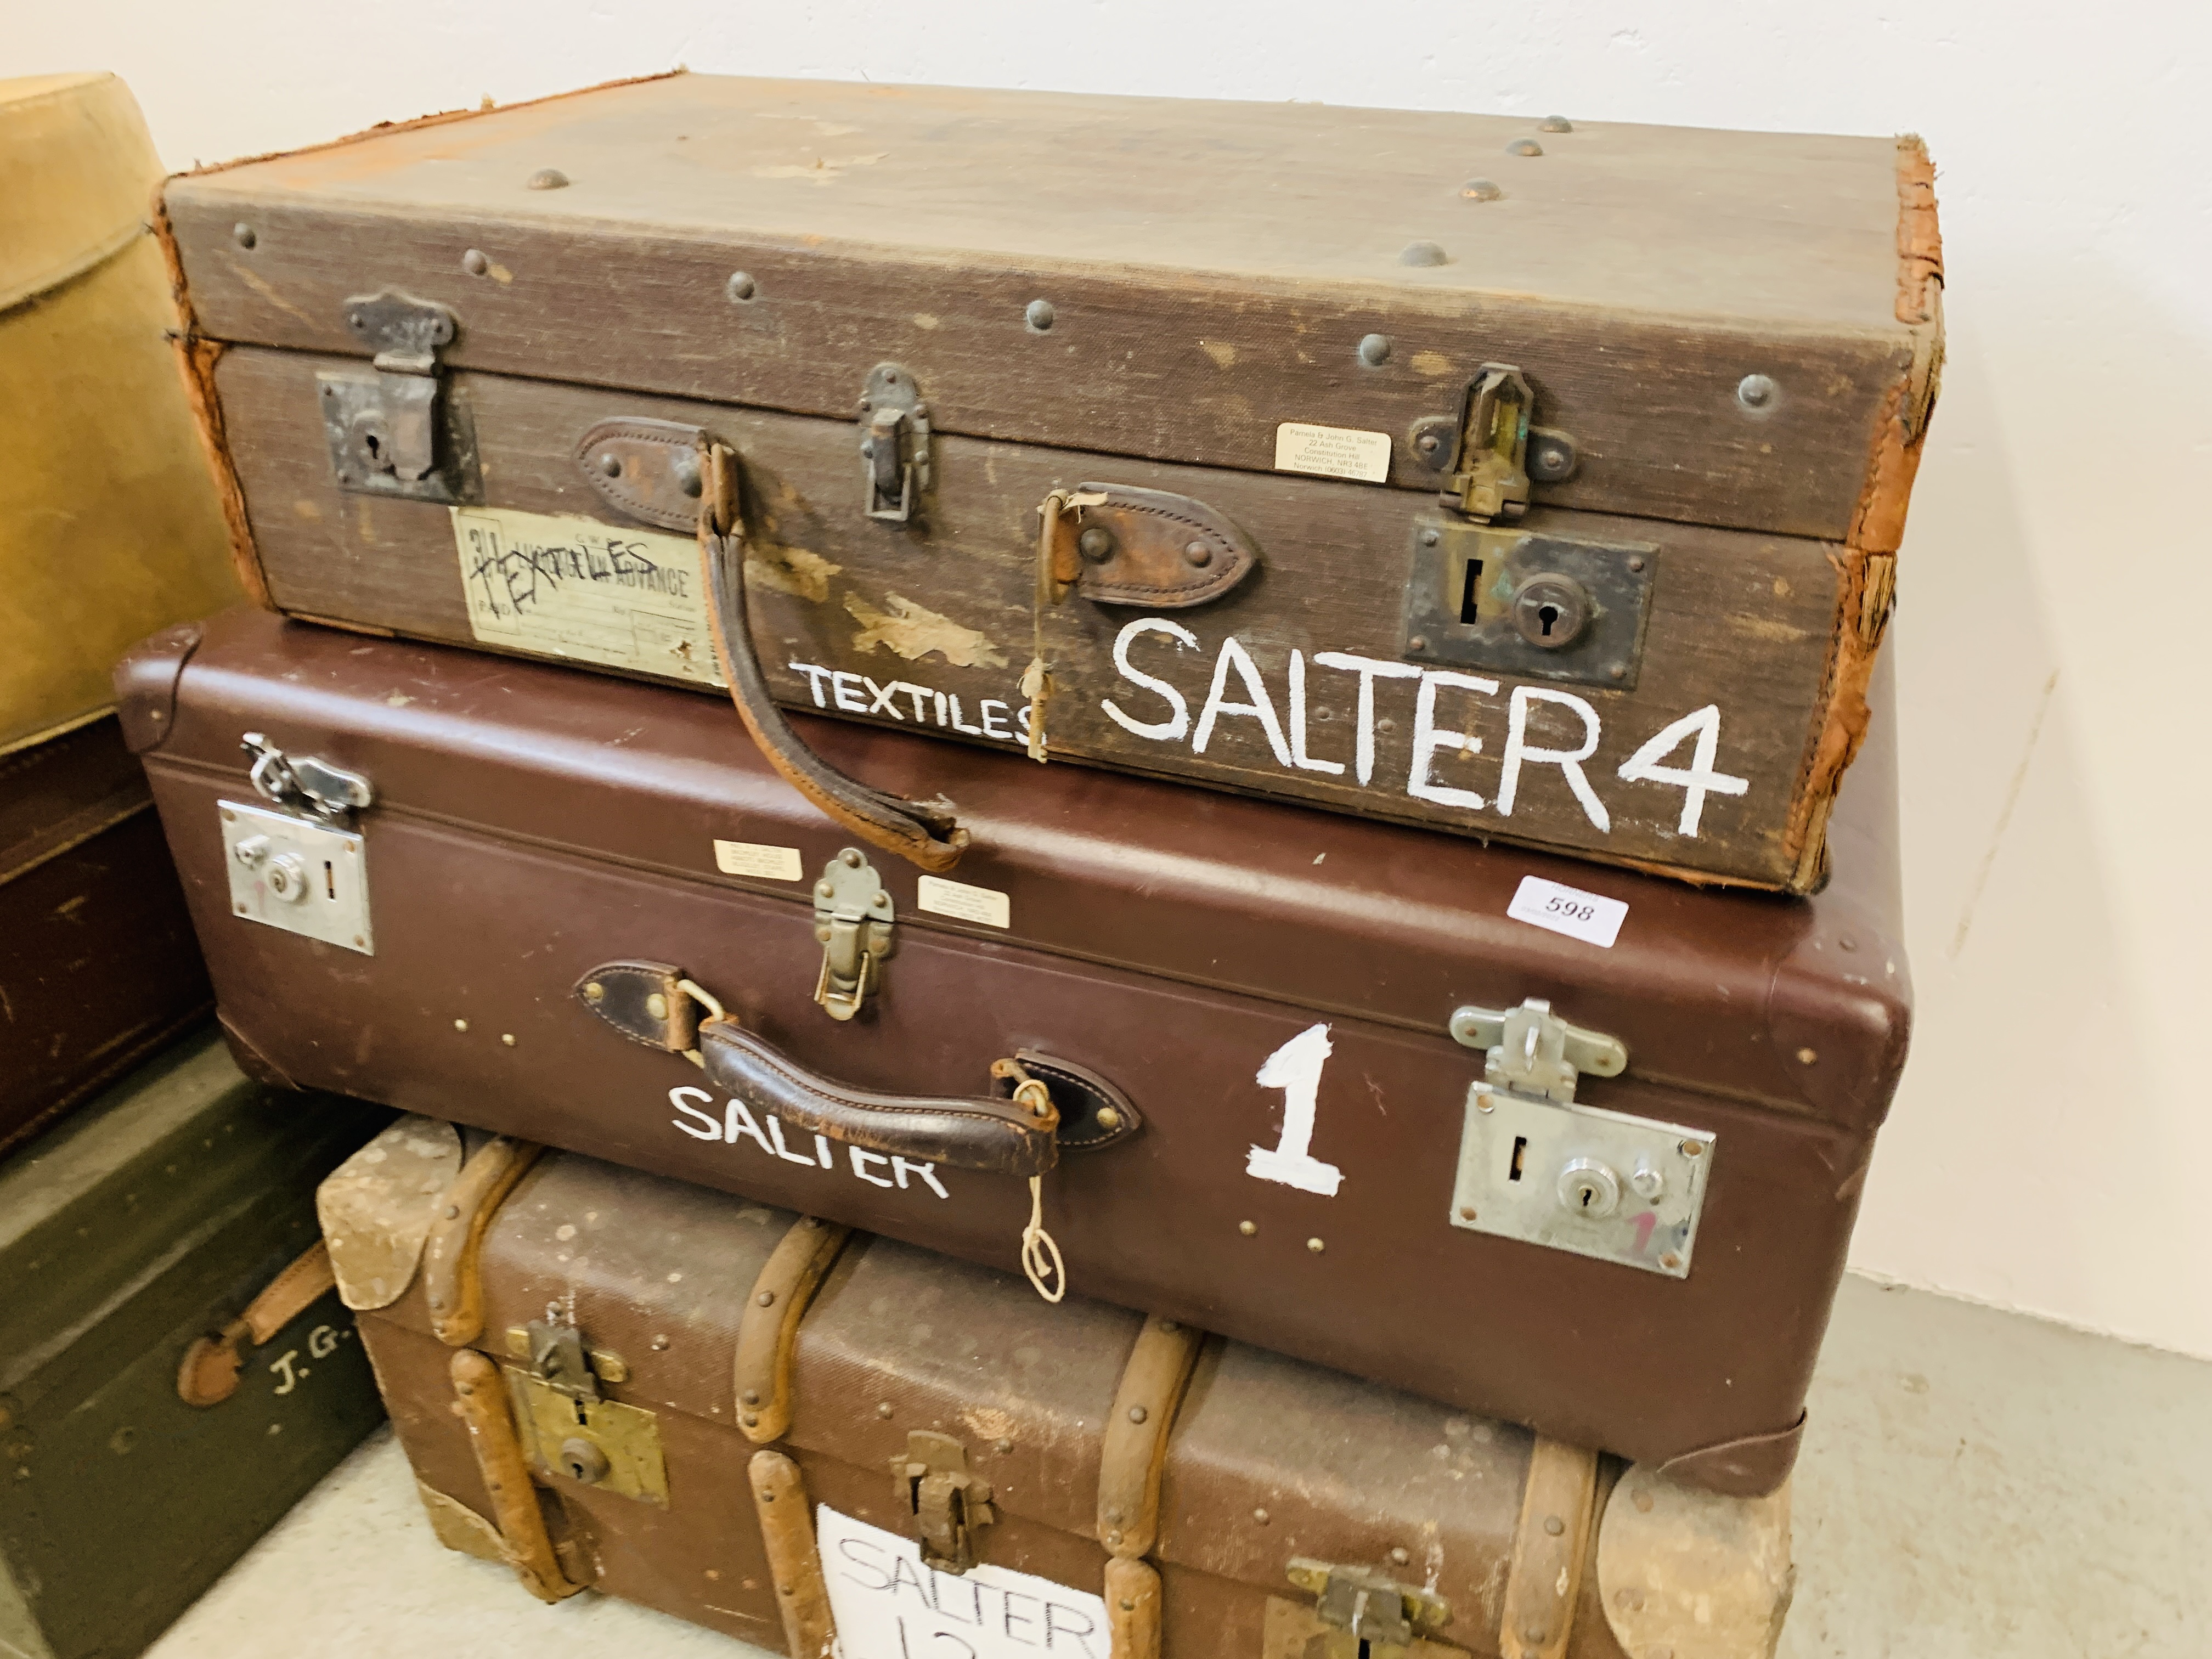 SIX VARIOUS VINTAGE TRAVEL TRUNKS / LUGGAGE BAGS TO INCLUDE MILLER MANUFACTURING METAL BOUND - Image 3 of 7